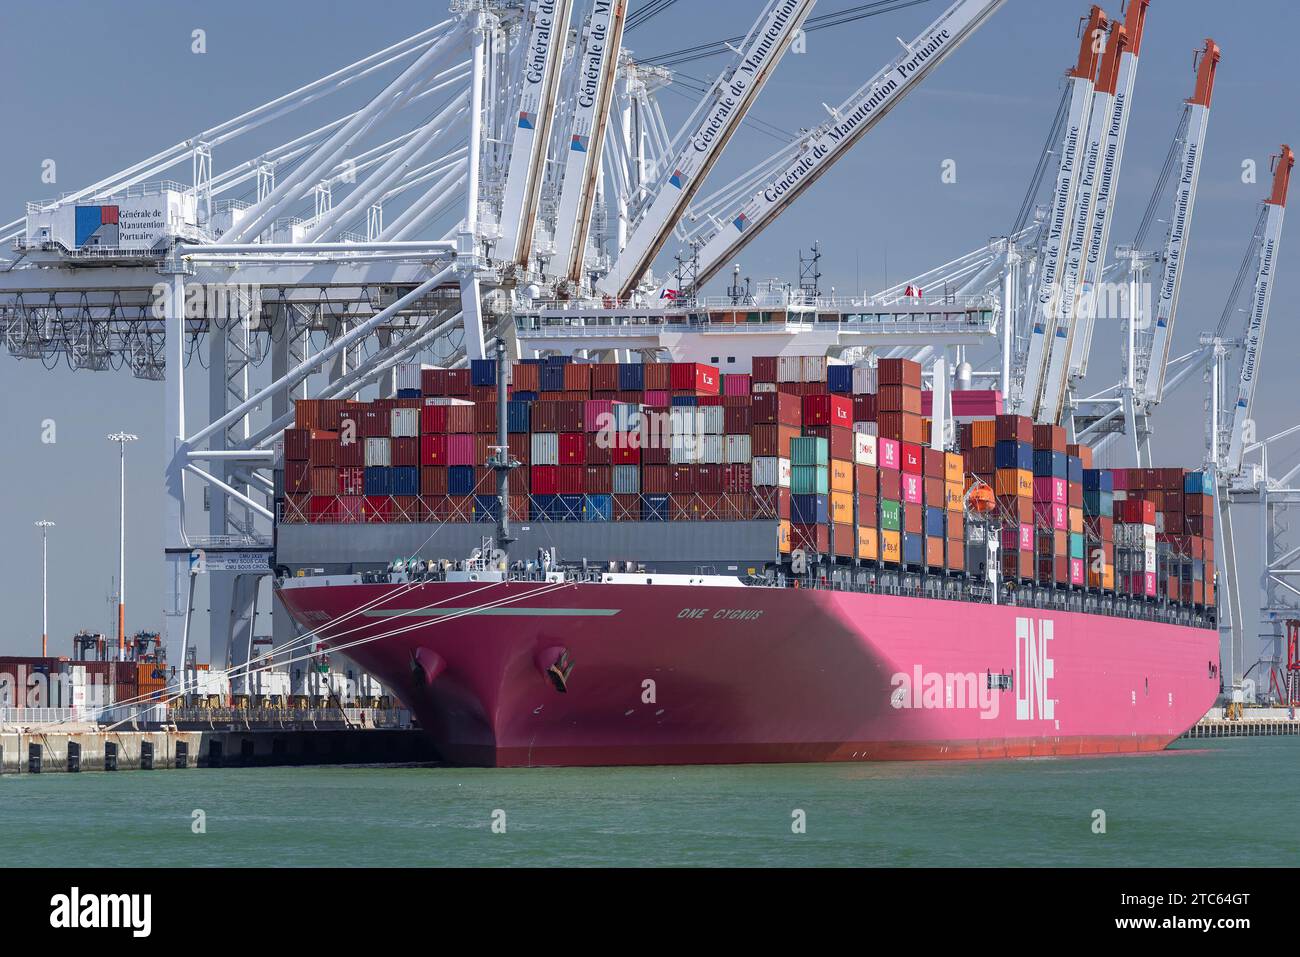 Le Havre, France - Container Ship ONE CYGNUS alongside at port of Le Havre with ship to shore container cranes. Stock Photo